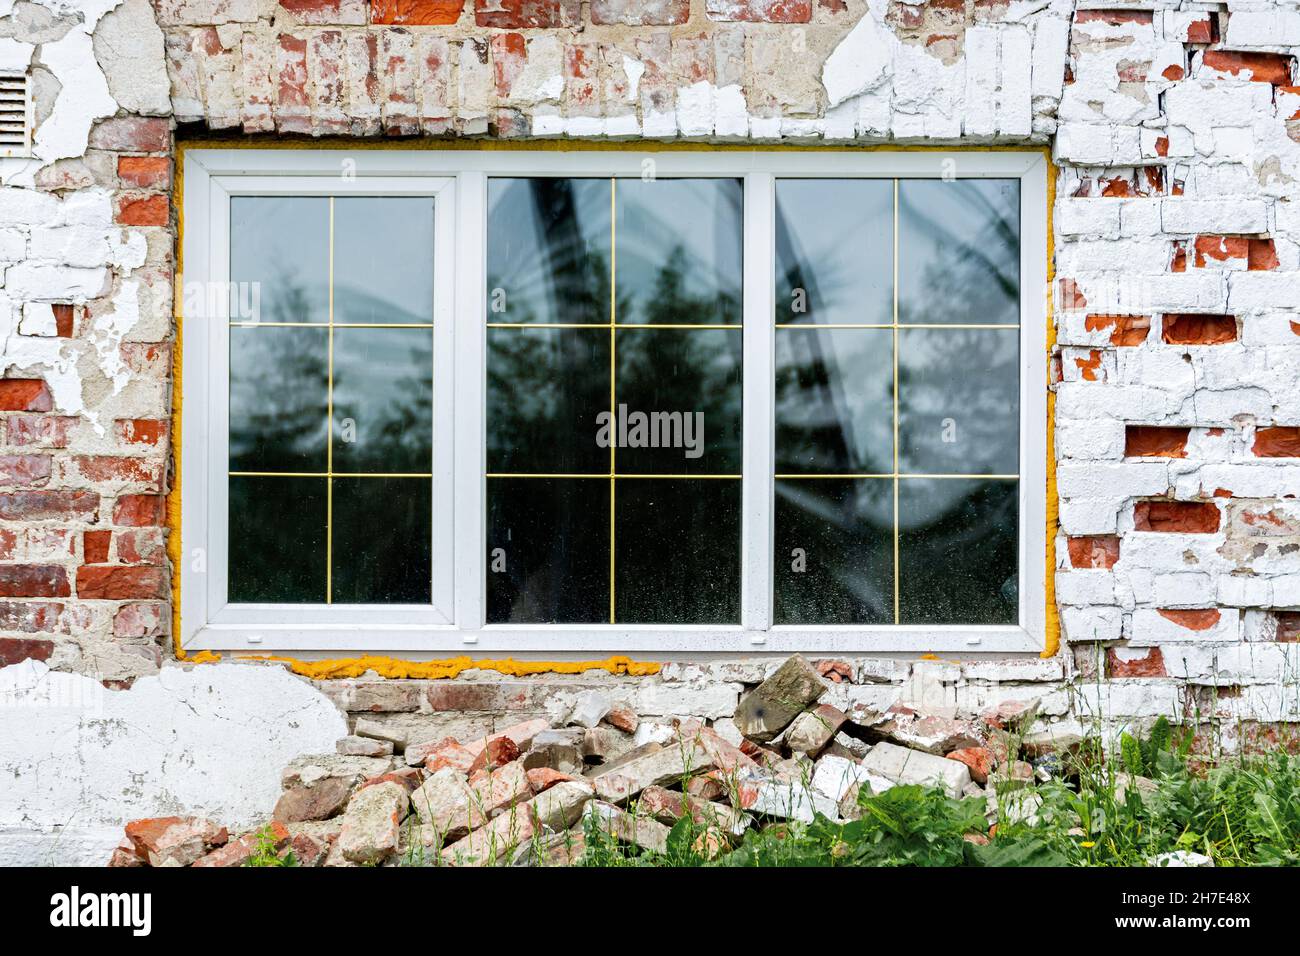 New rectangular window set in an old red brick wall. From the window of the world series. Stock Photo